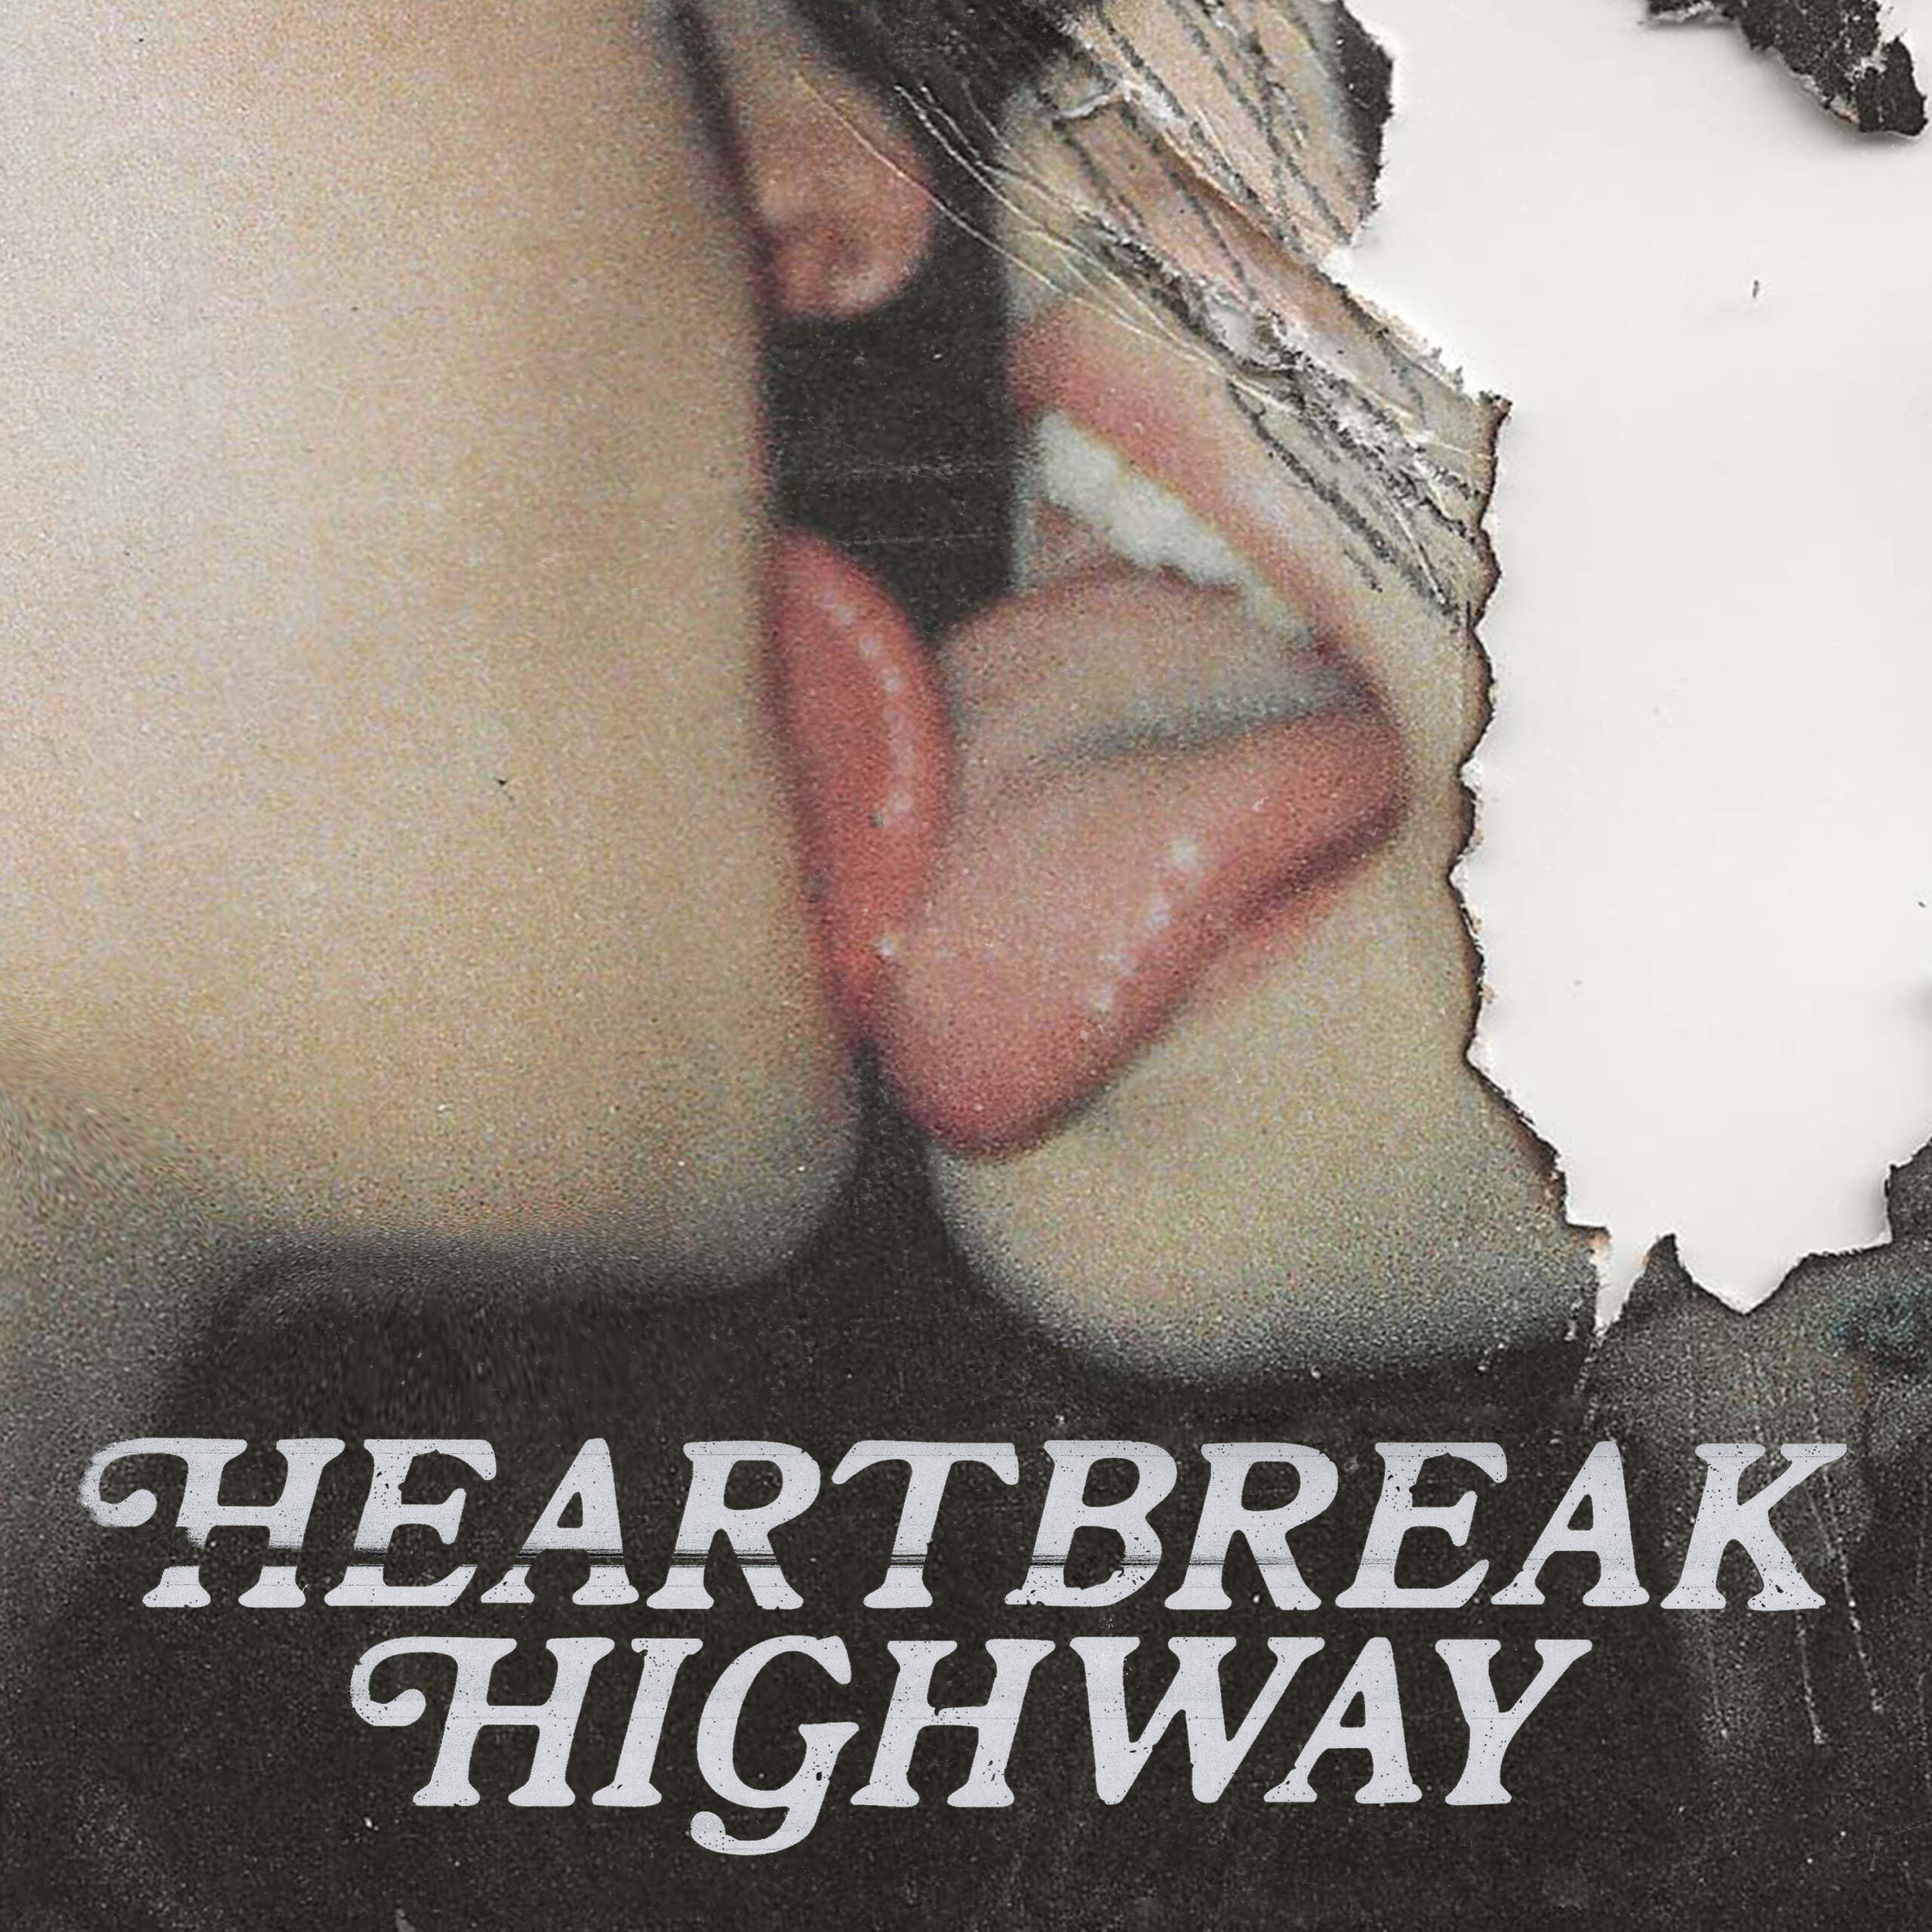 Heartbreak Highway via Colin Citron for Elektra Music Group for use by 360 Magazine